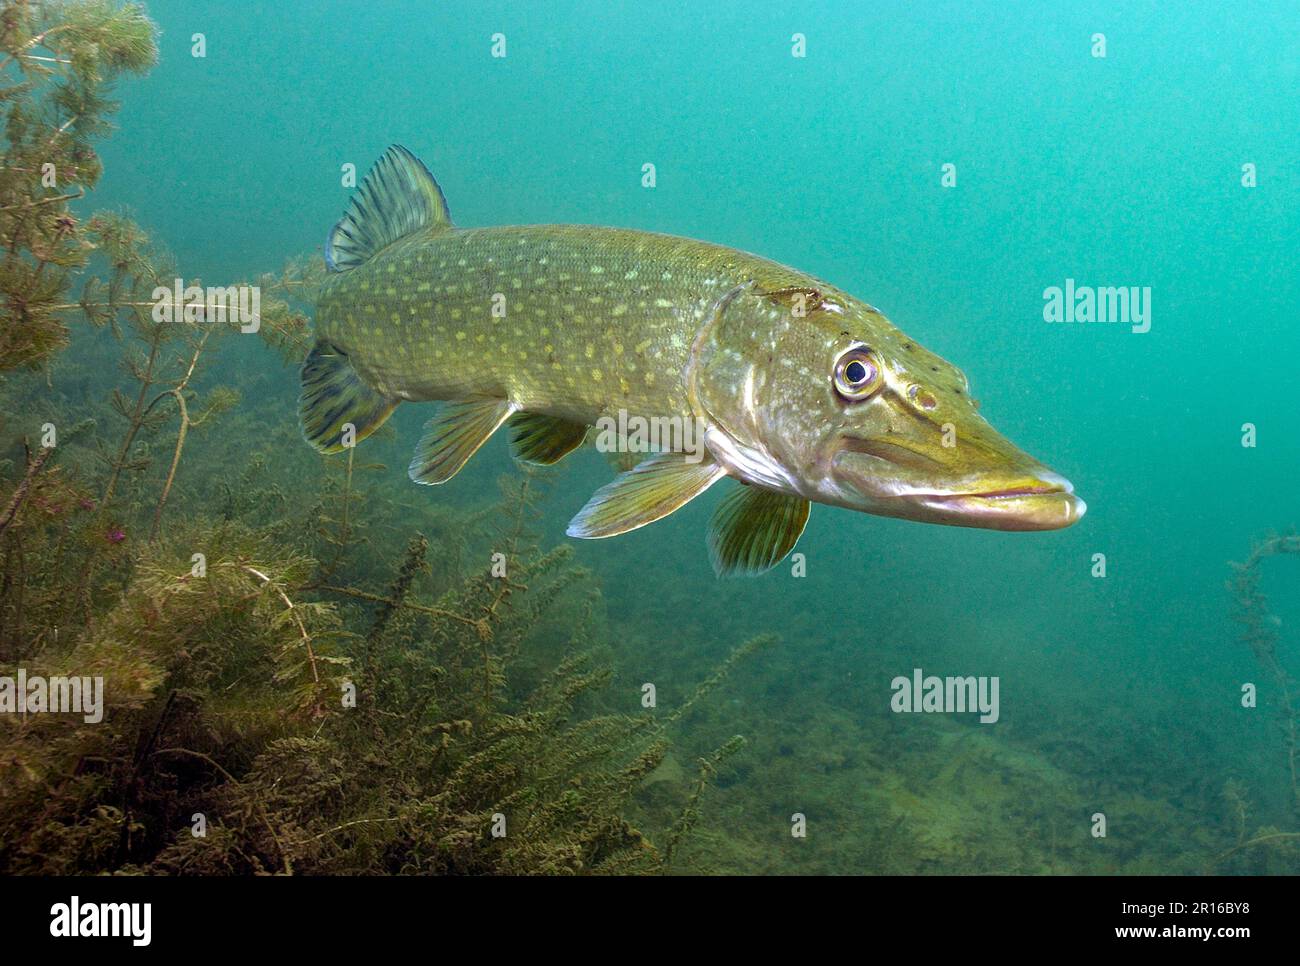 Northern pike (Esox lucius) Stock Photo